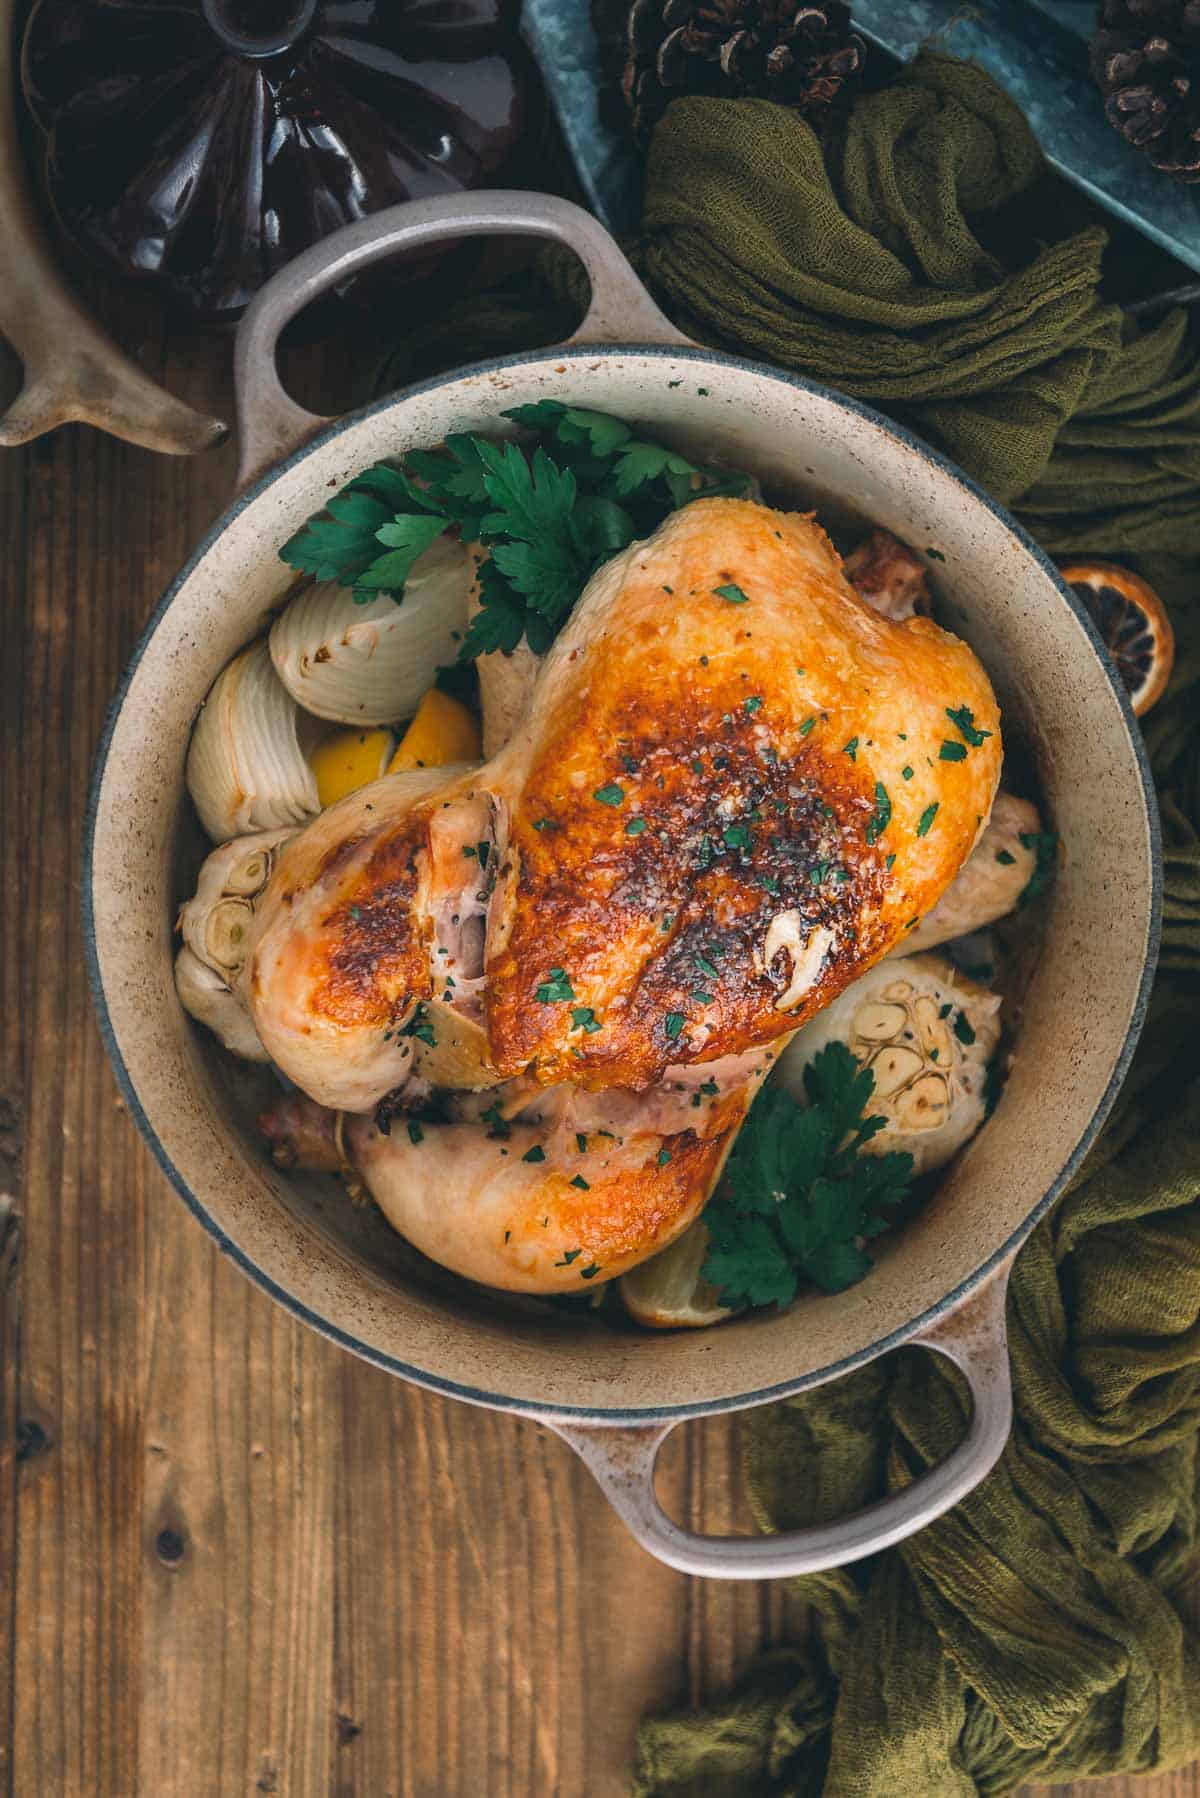 Roasted chicken in a Dutch oven on a wooden table ready to be served.